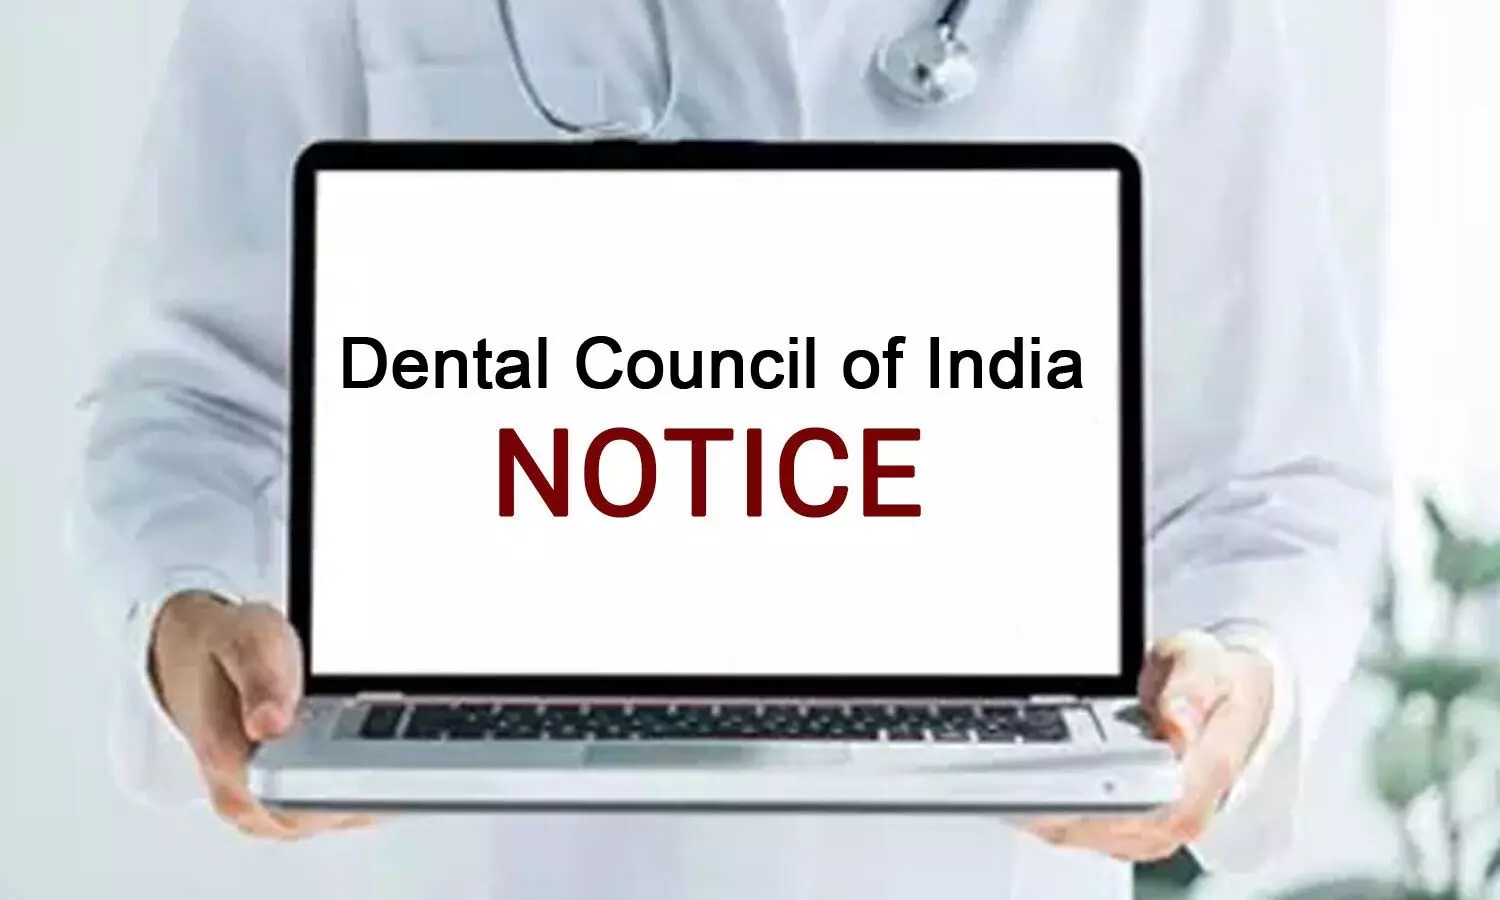 DCI issues notice to 10 Dental Colleges over non-payment of outstanding dues